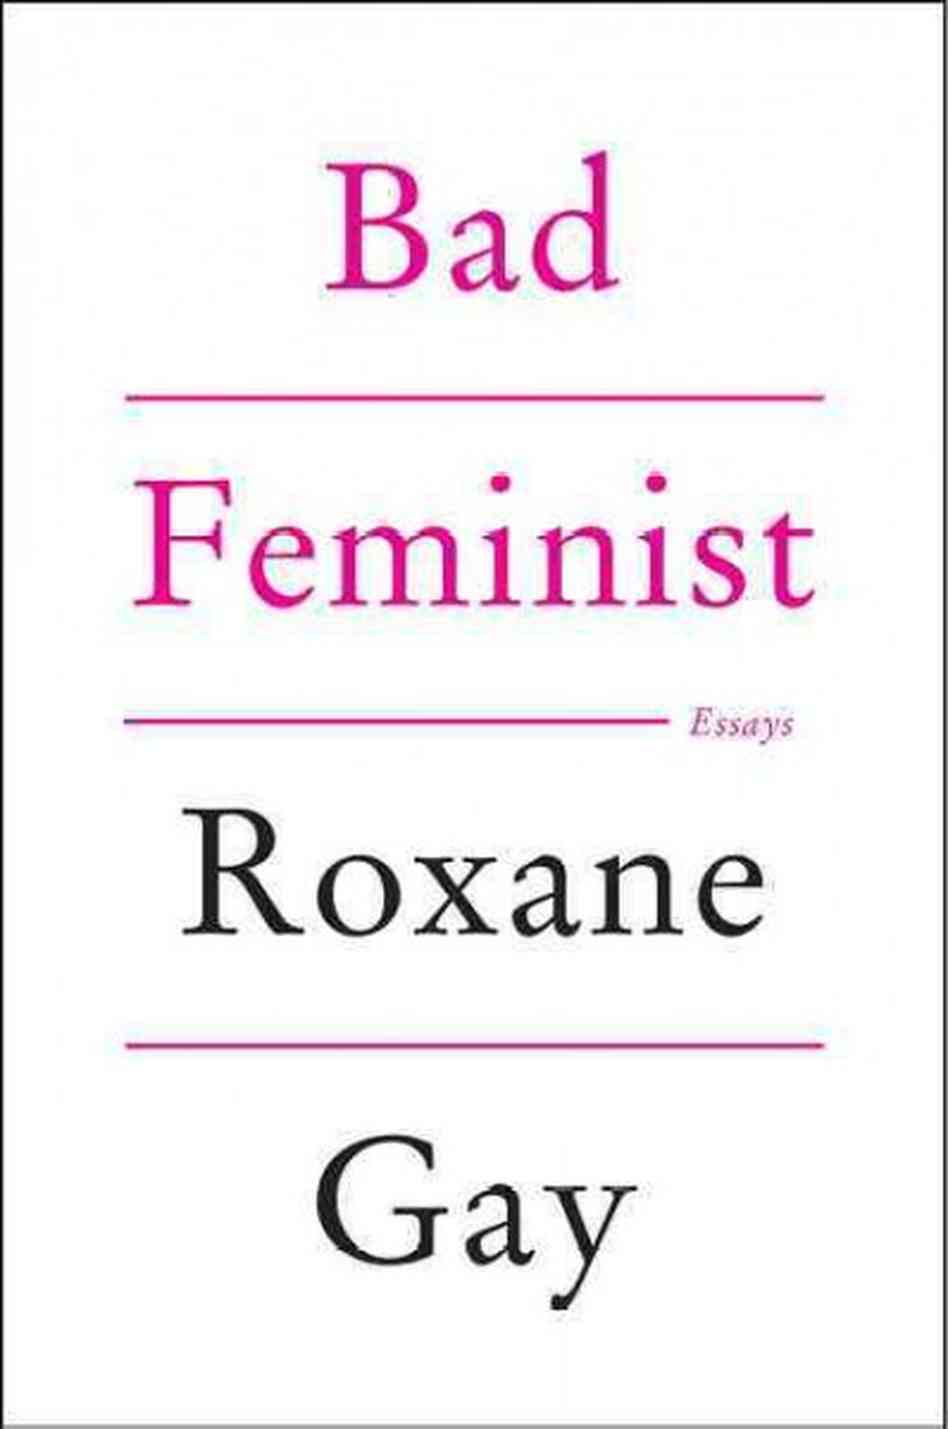 Roxanne Gay is a feminist full of contradictions, but in her book of essays called Bad Feminist, she uses those contradiction to weave funny and insightful arguments on everything from the pains of watching The Help, to bemoaning role models like Bill Cosby who urge African-Americans to act like ideal citizens, despite socioeconomic issues that exacerbate racism and poverty. Whatever the topic, you can bet Gay has a witty and brave response as she takes a sincere look at the way the culture we consume becomes who we are. 
iTunes - $10.99